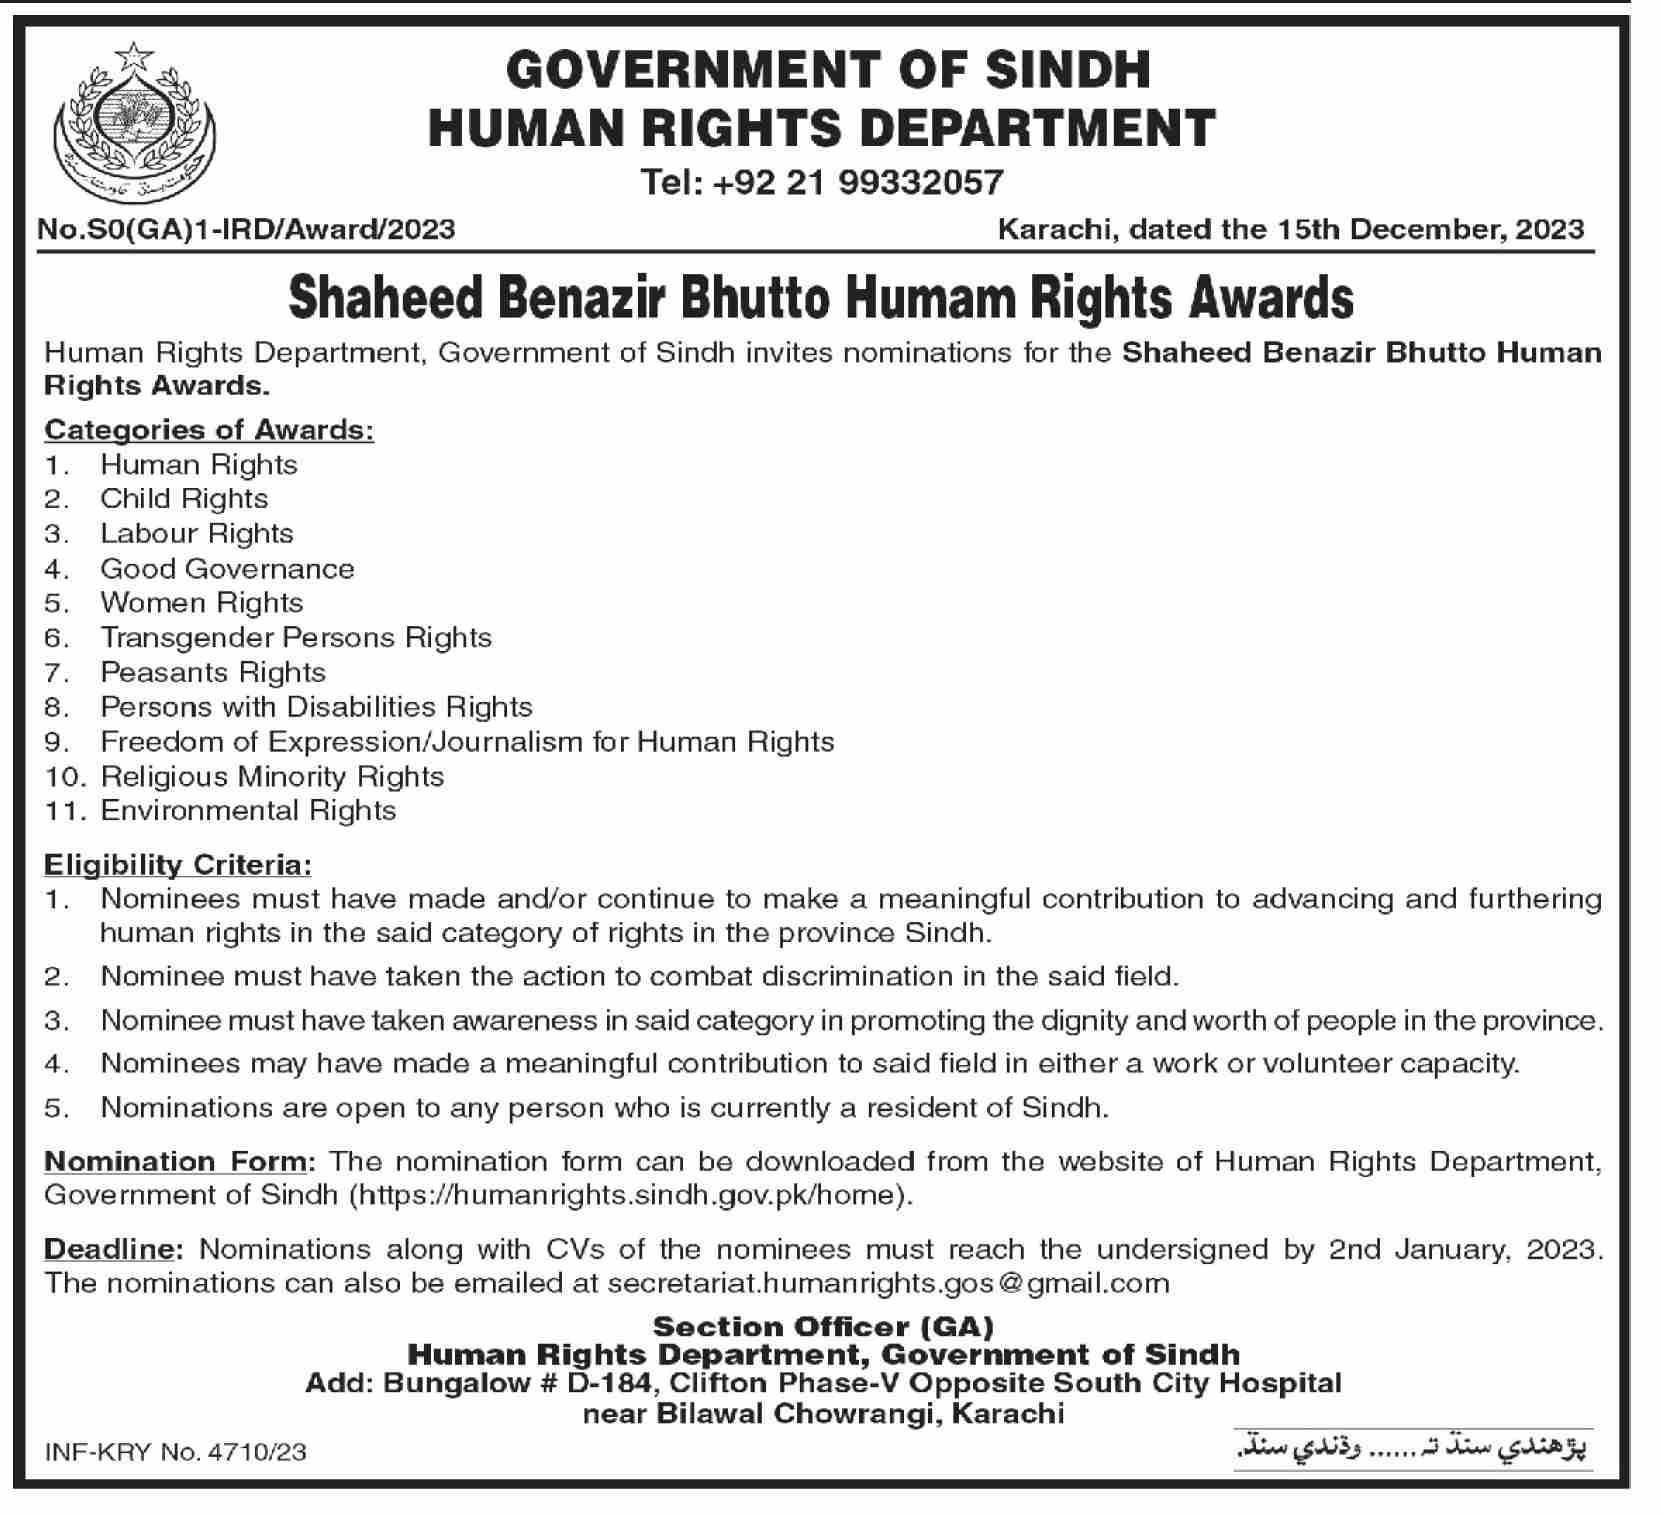 Shaheed Benazir Bhutto Human Rights Awards Eligibility Criteria & Categories